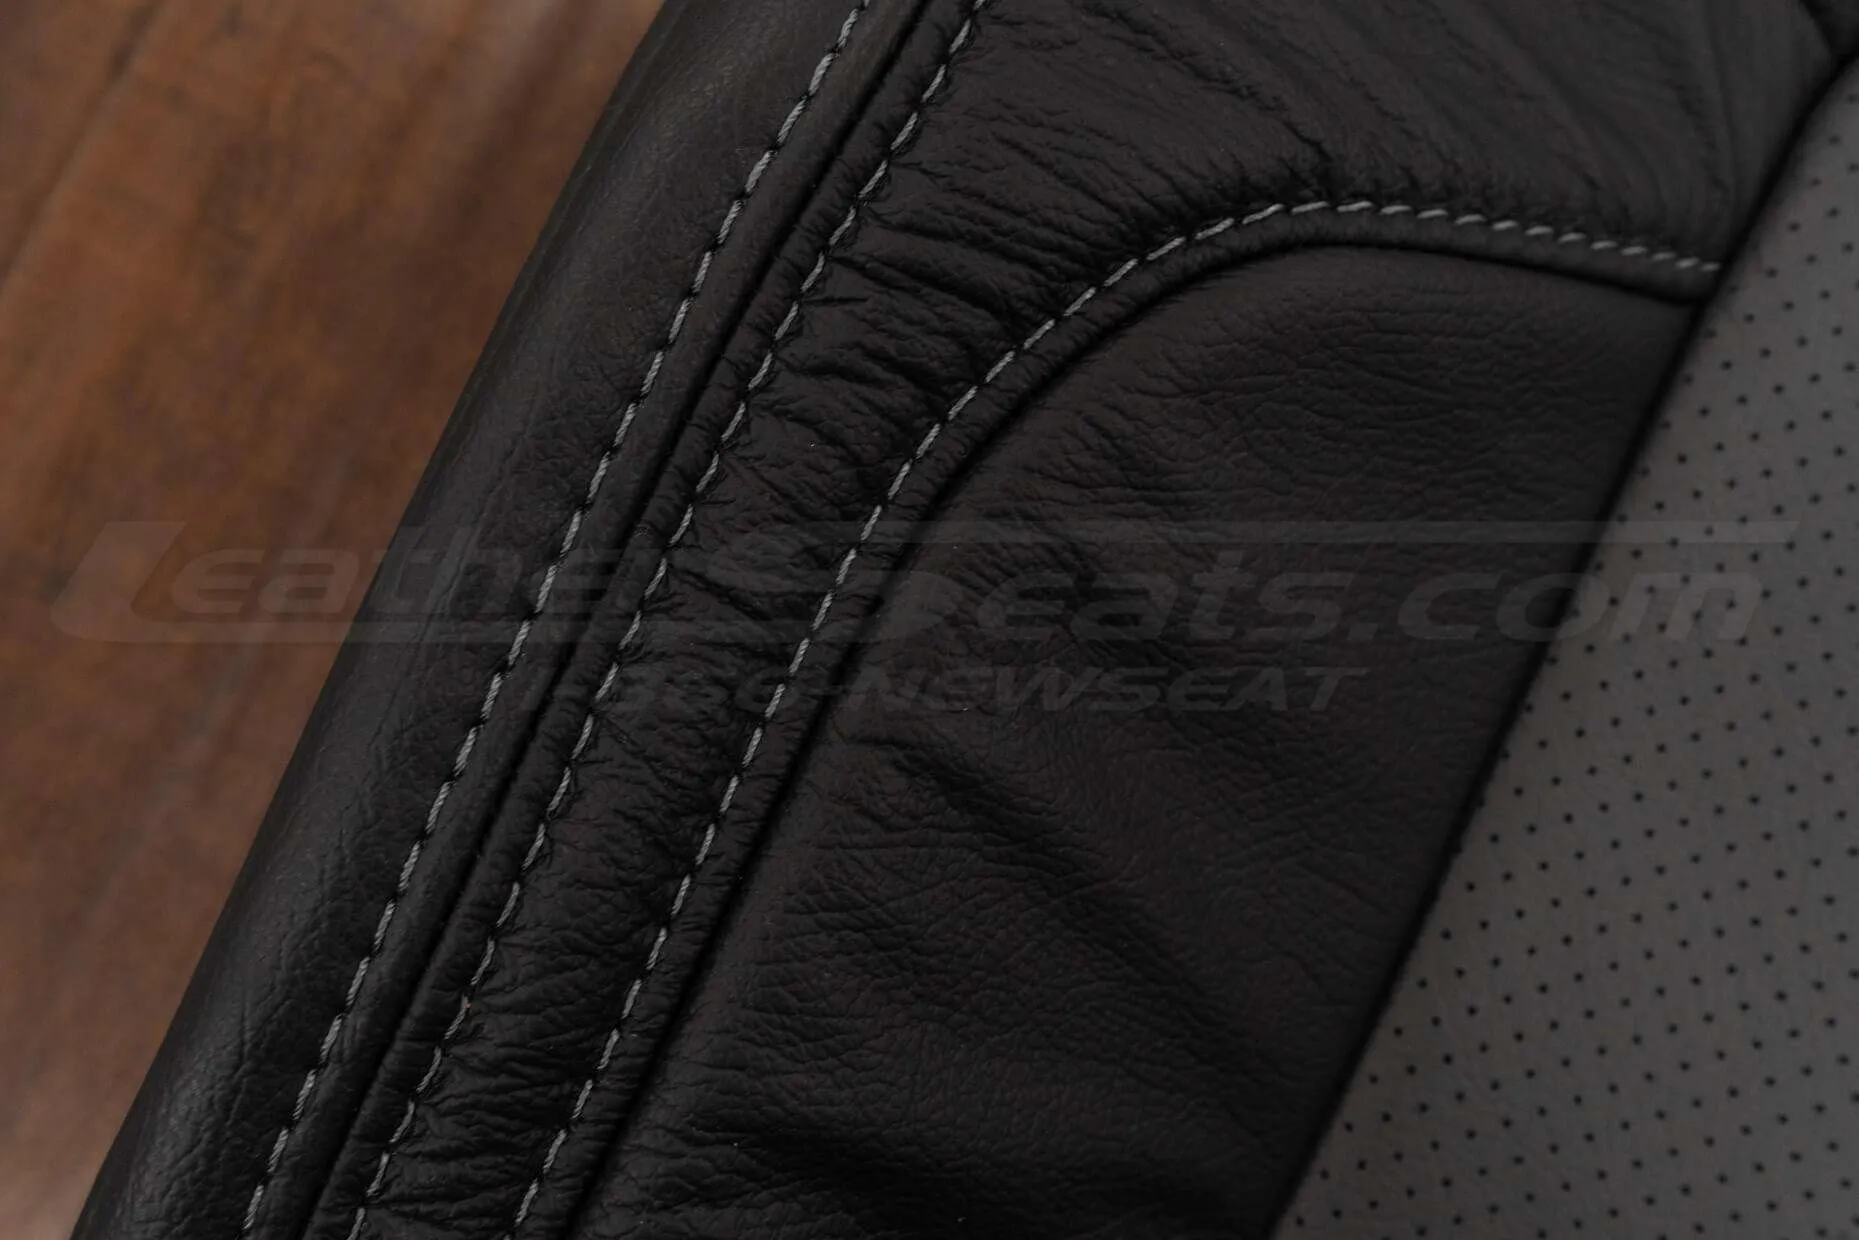 Charcoal double-stitching